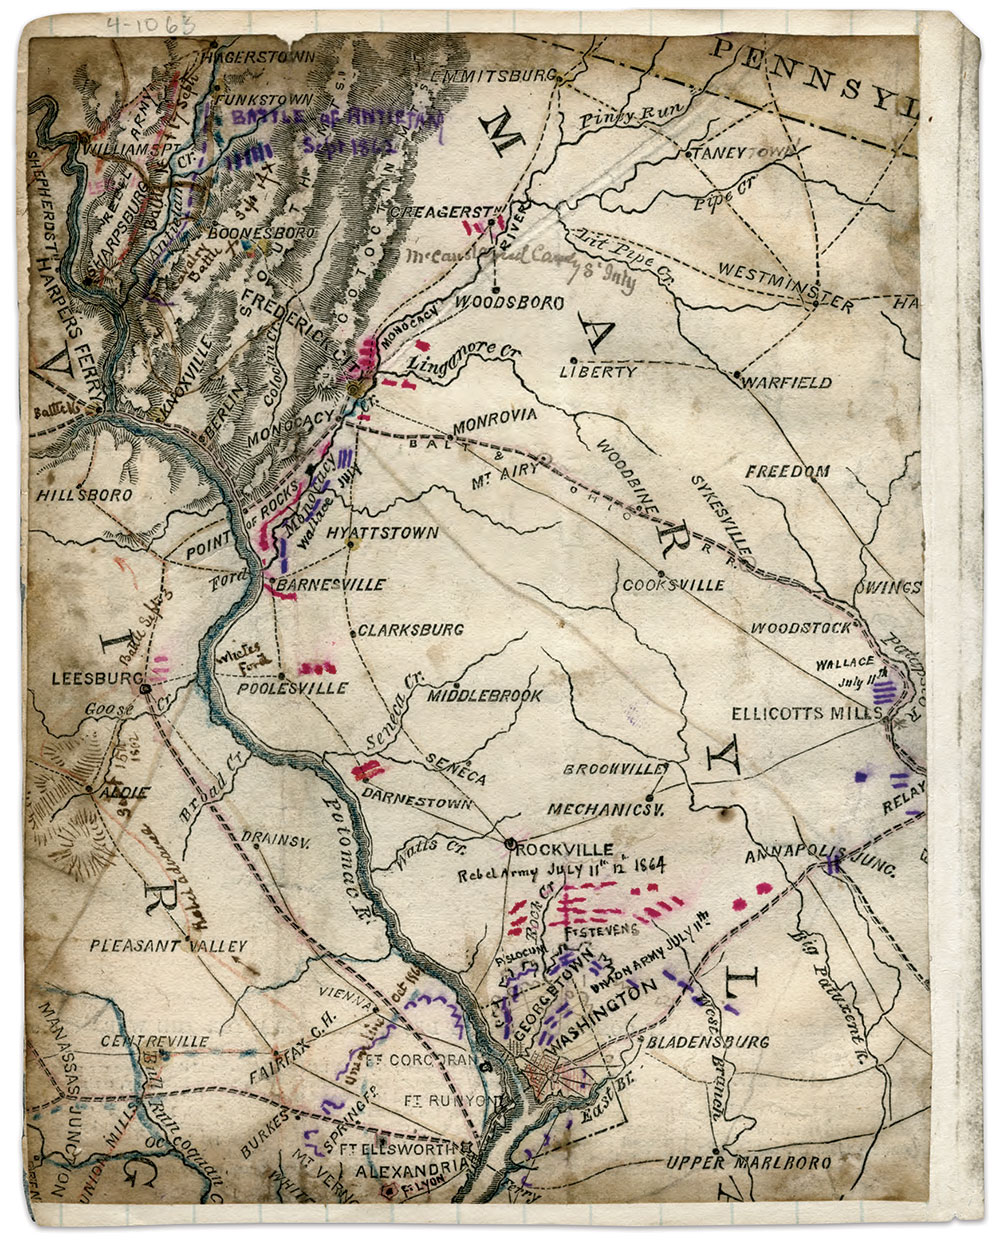 The location of the Battle of the Monocacy and other engagements as Lt. Gen. Early and his corps marched on Washington are revealed in this map by U.S. Topographical Engineer Robert Knox Sneden. Library of Congress.